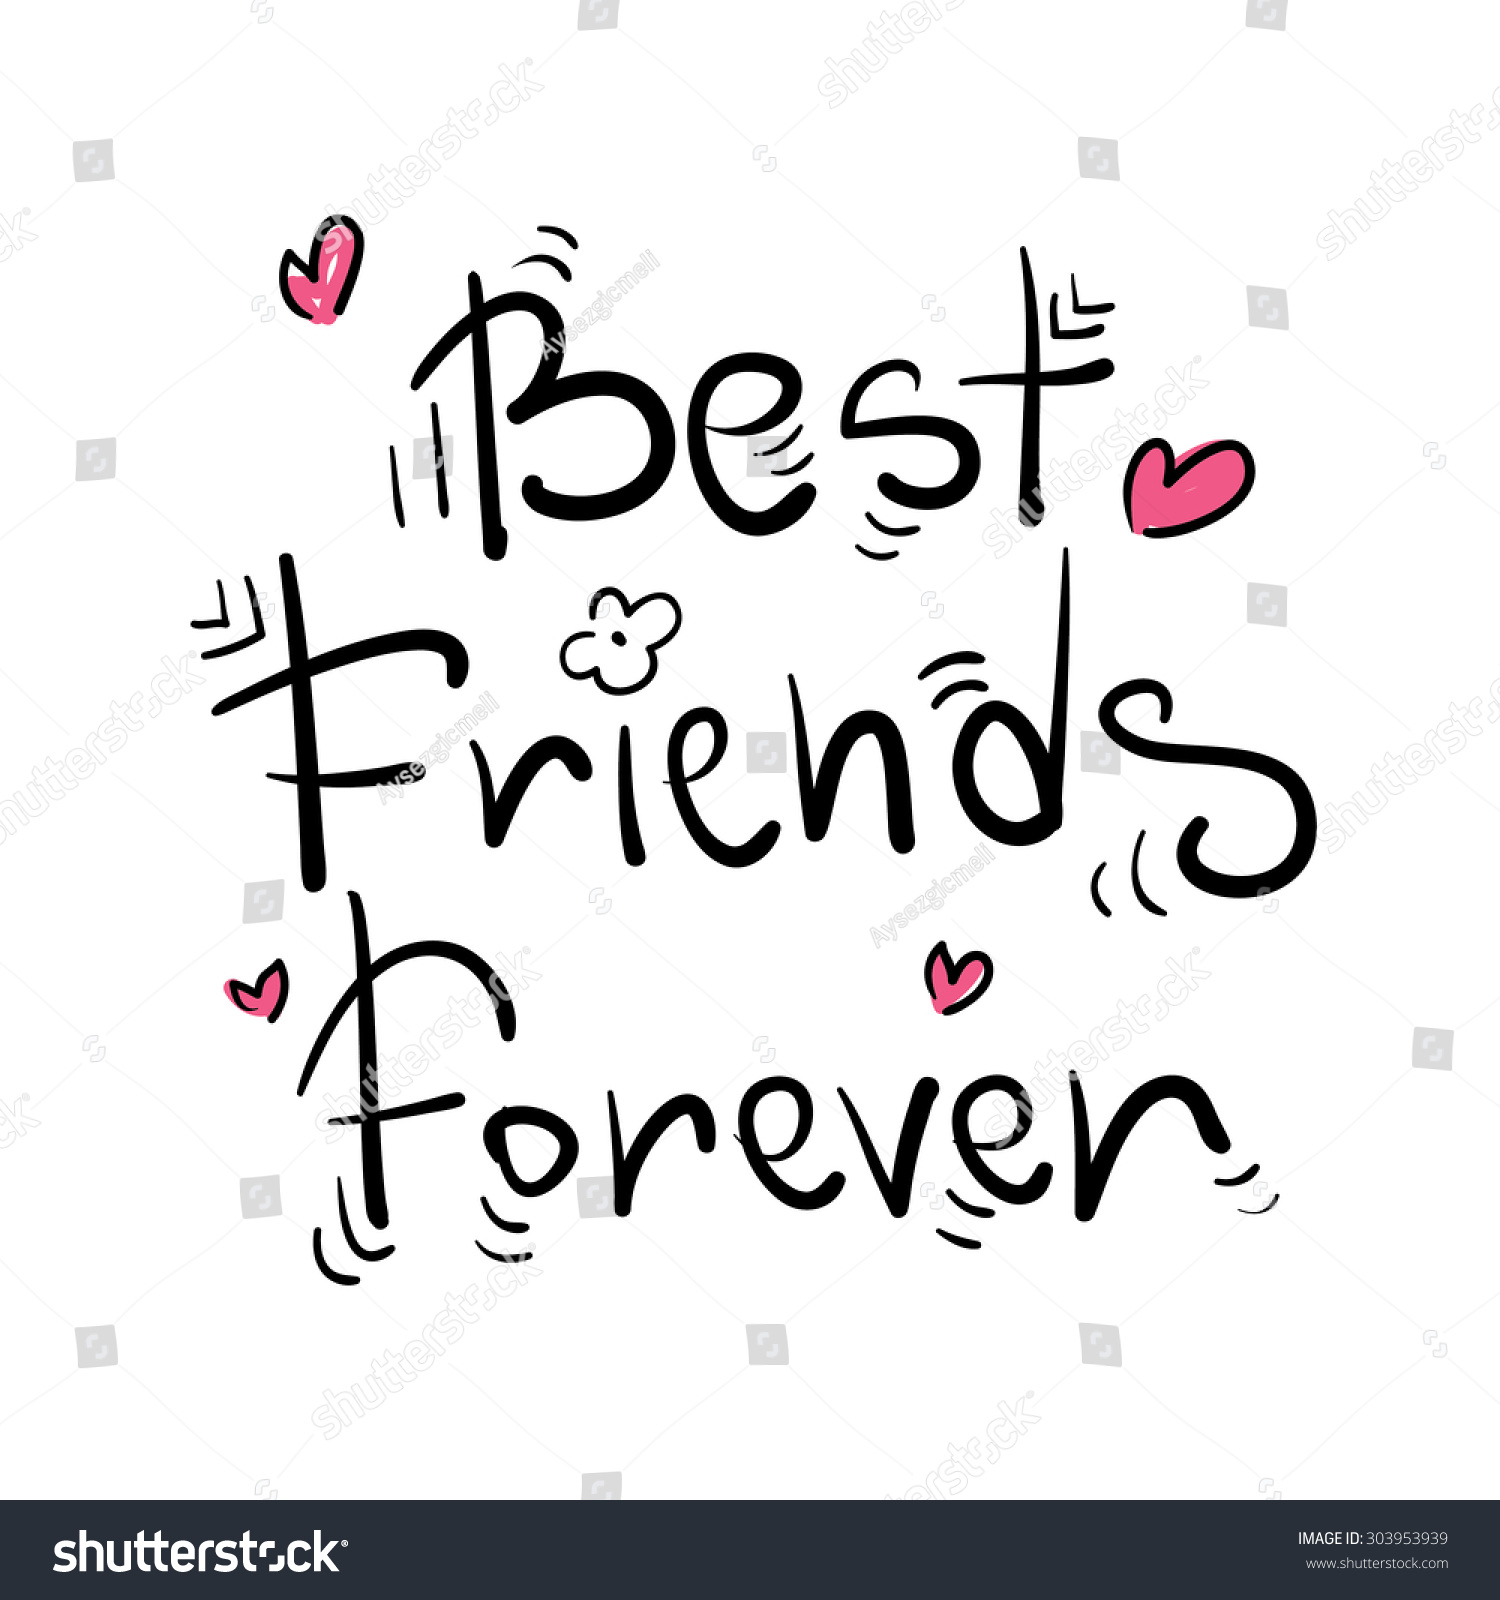 Best Friends Forever Greeting Card Poster Stock Vector (Royalty Free ...